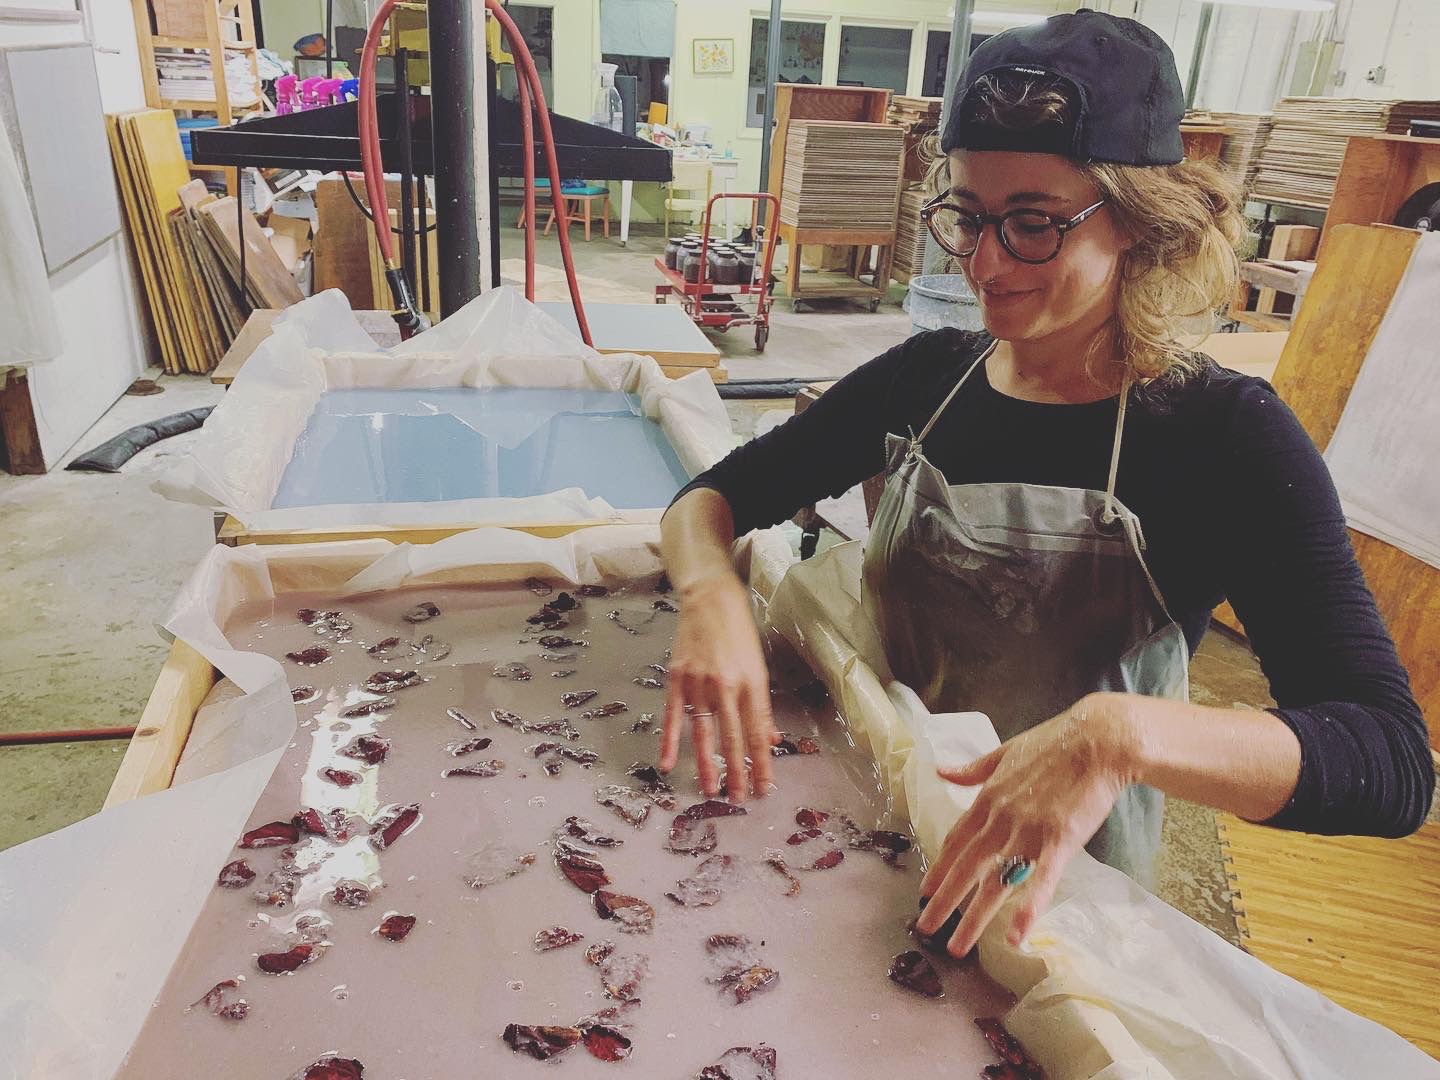 Printmaking Talk and Workshop: Unpredictability, Presence, and Creative Action